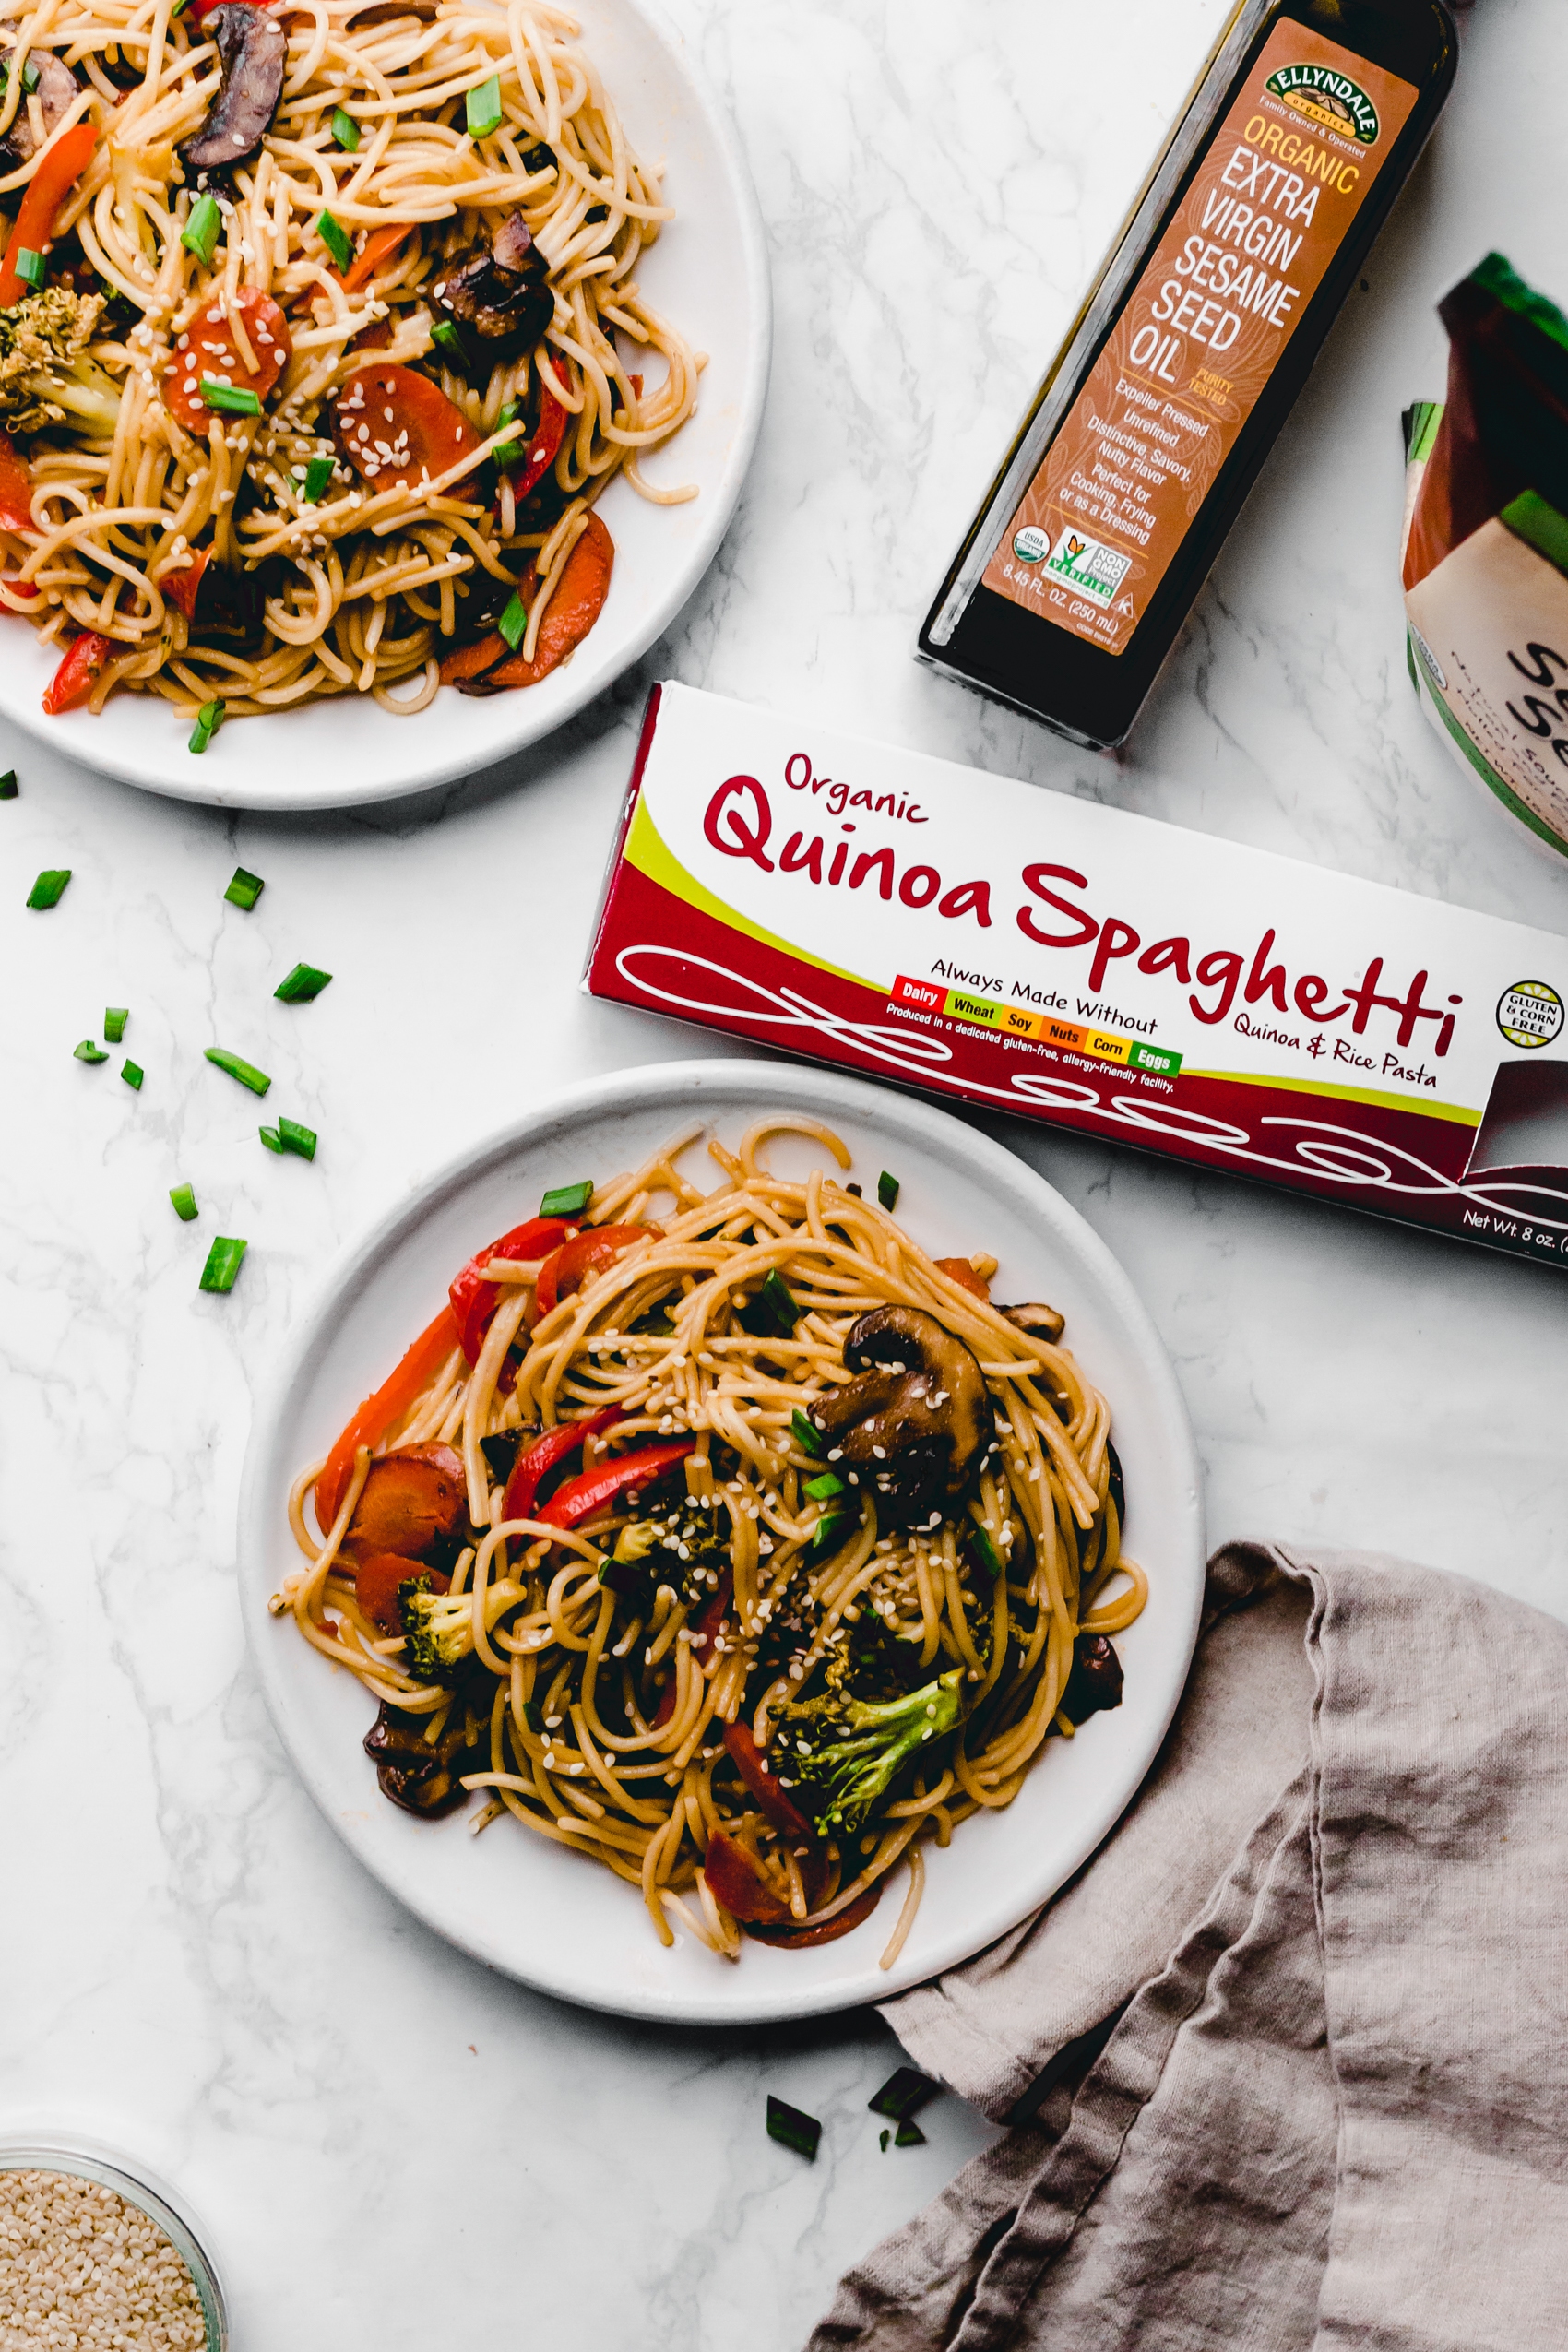 two plates of vegetable lo mein served alongside a box of gluten-free spaghetti and a bottle of sesame seed oil